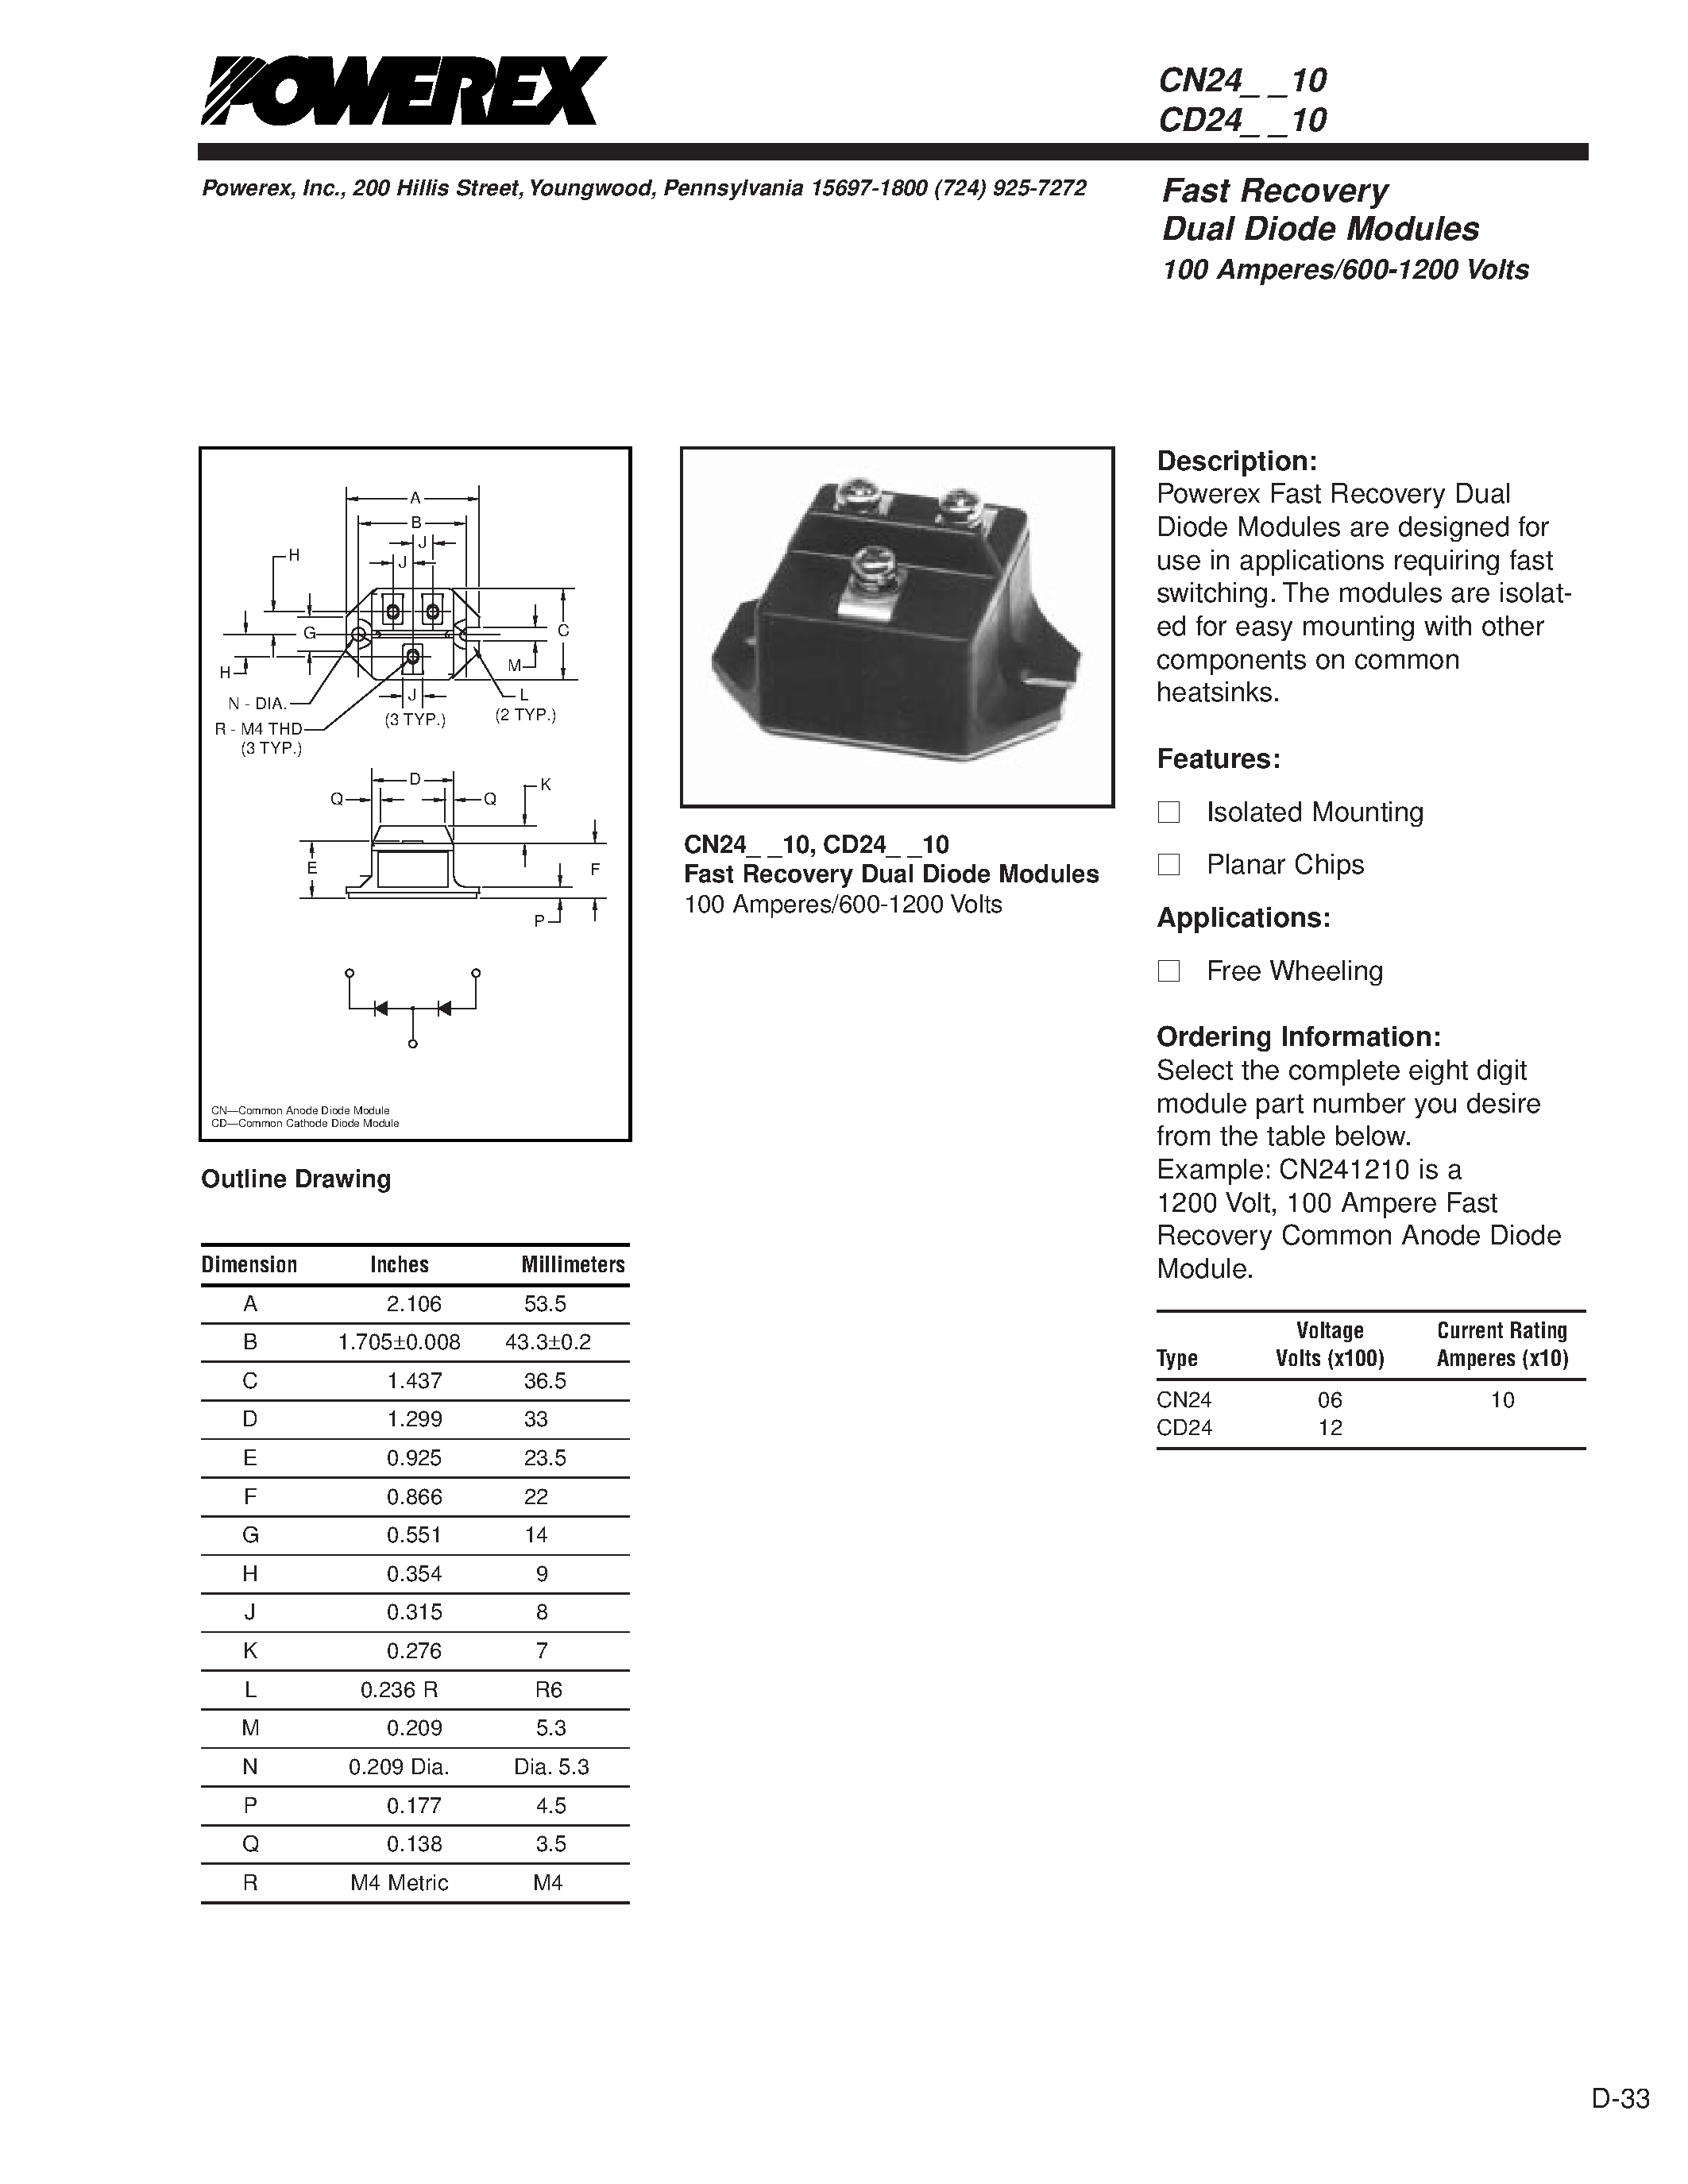 Datasheet CD240610 - Fast Recovery Dual Diode Modules 100 Amperes/600-1200 Volts page 1